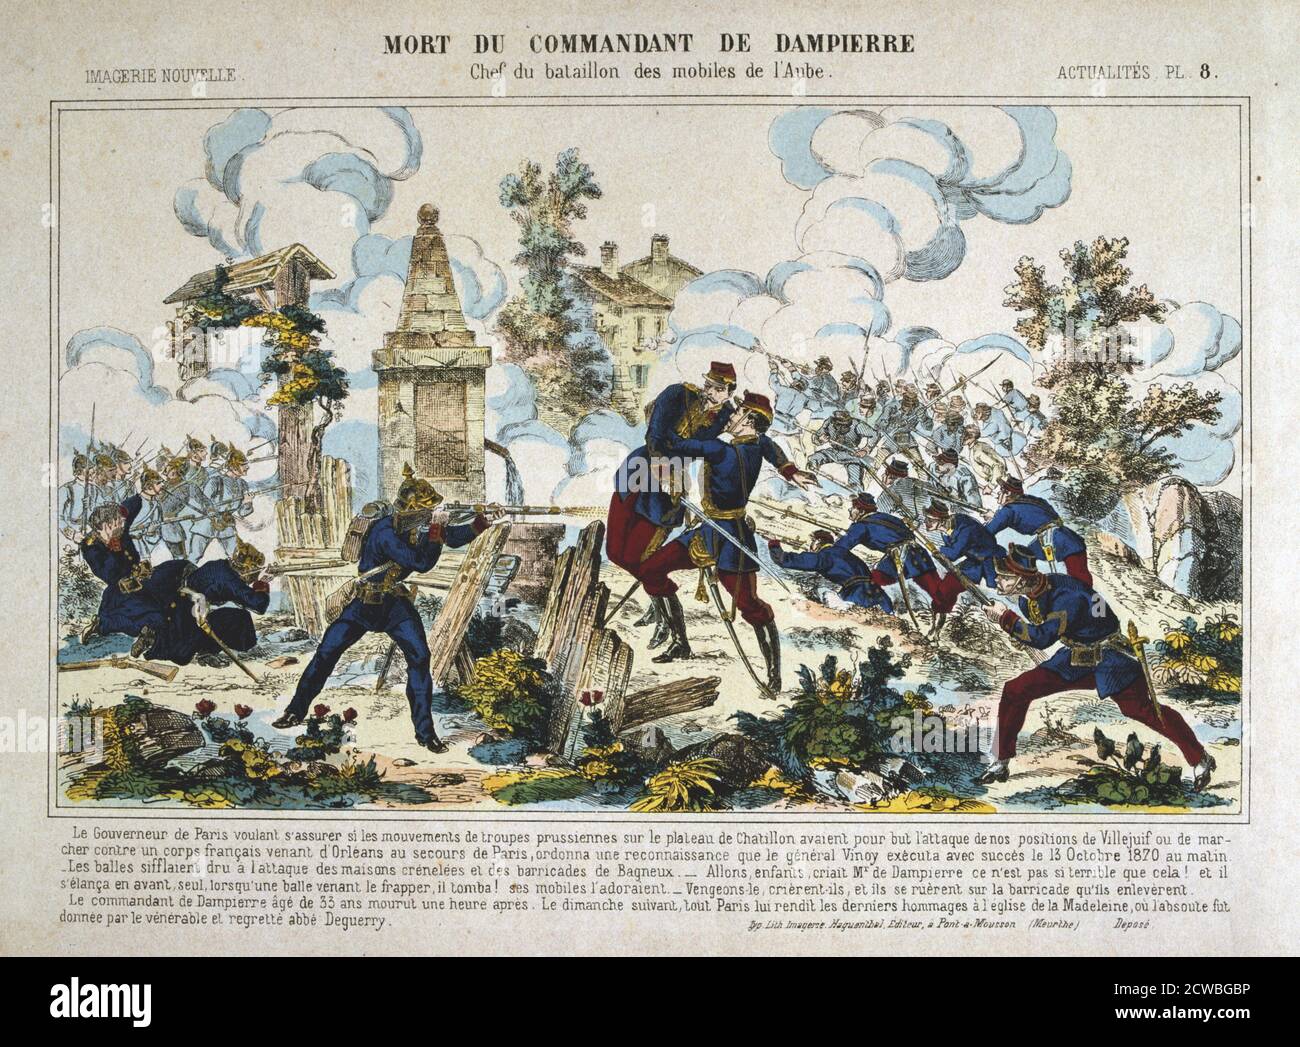 Death of Commandant de Dampierre, Siege of Paris, Franco-Prussian War, 13th October 1870. Dampierre was killed by rifle fire while on a reconnaissance to try to ascertain Prussian troop movements on the Plateau de Chatillon. From a private collection. Stock Photo